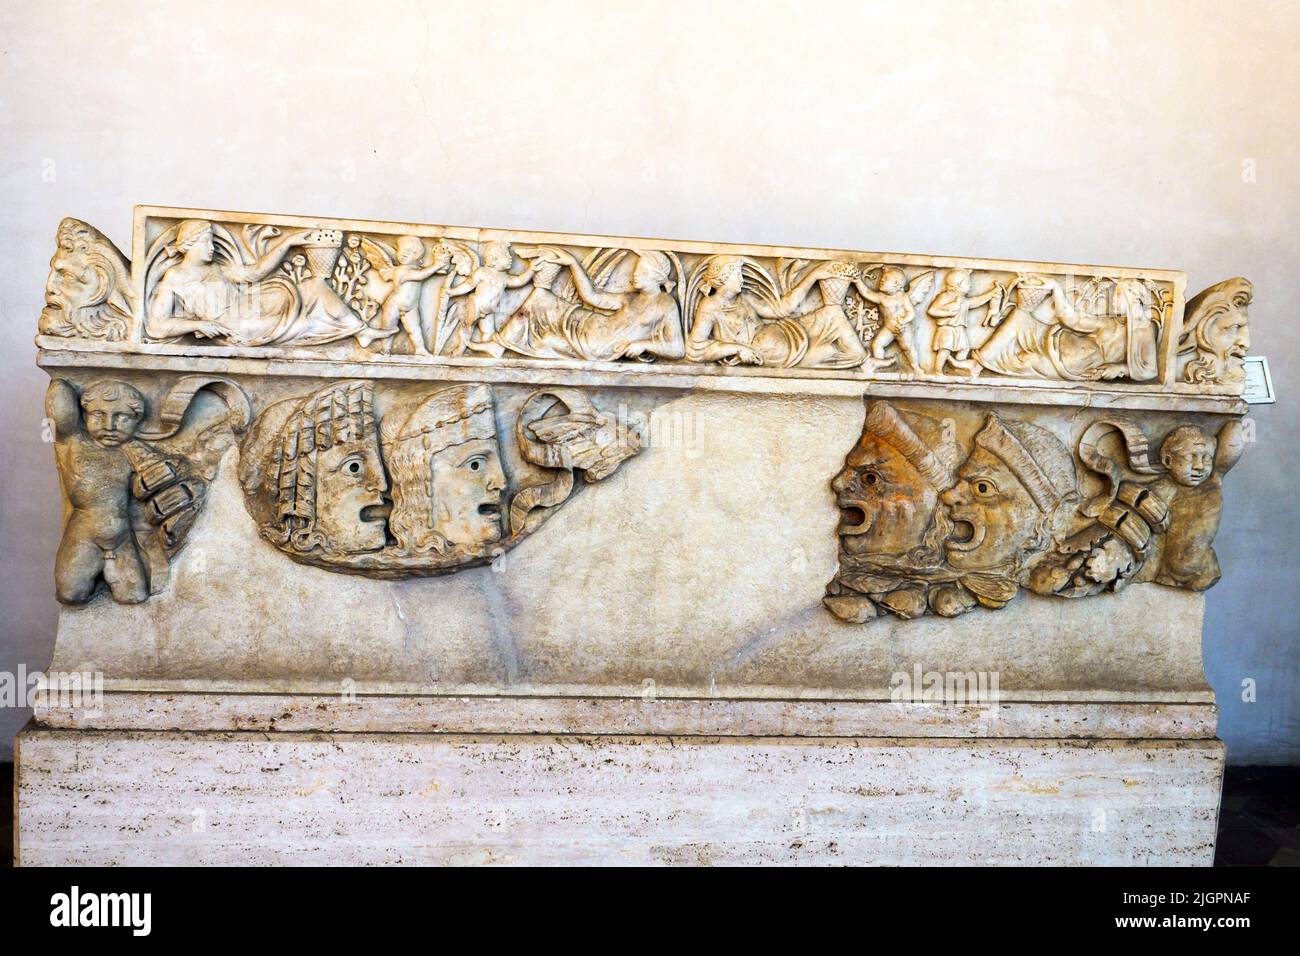 Sarcophagus decoretated with garlands, Cupids and tragic masks . Lid decorated with Seasons, Cupids and acroterial masks White marble 150-160 AD - National Roman Museum - The Baths of Diocletian - Rome, Italy Stock Photo